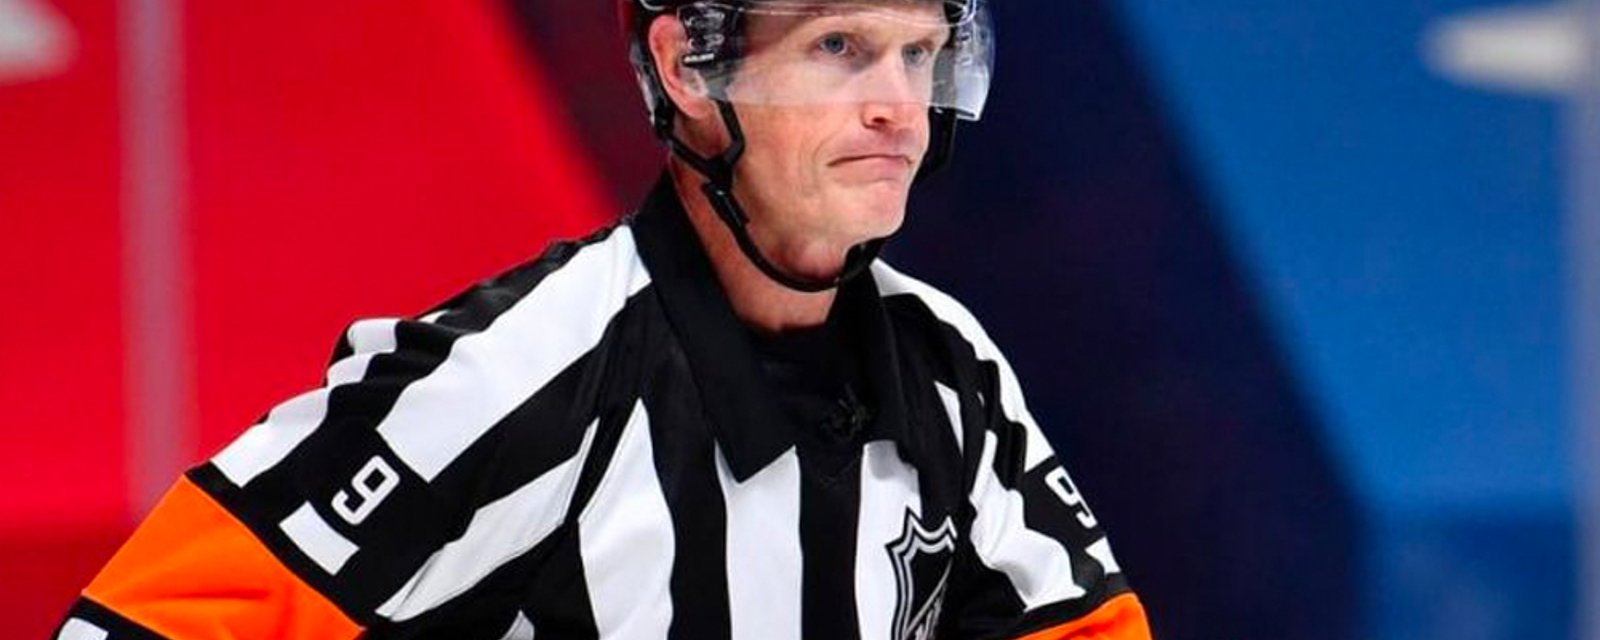 NHL names referees for Game 5 and Habs fans are not happy